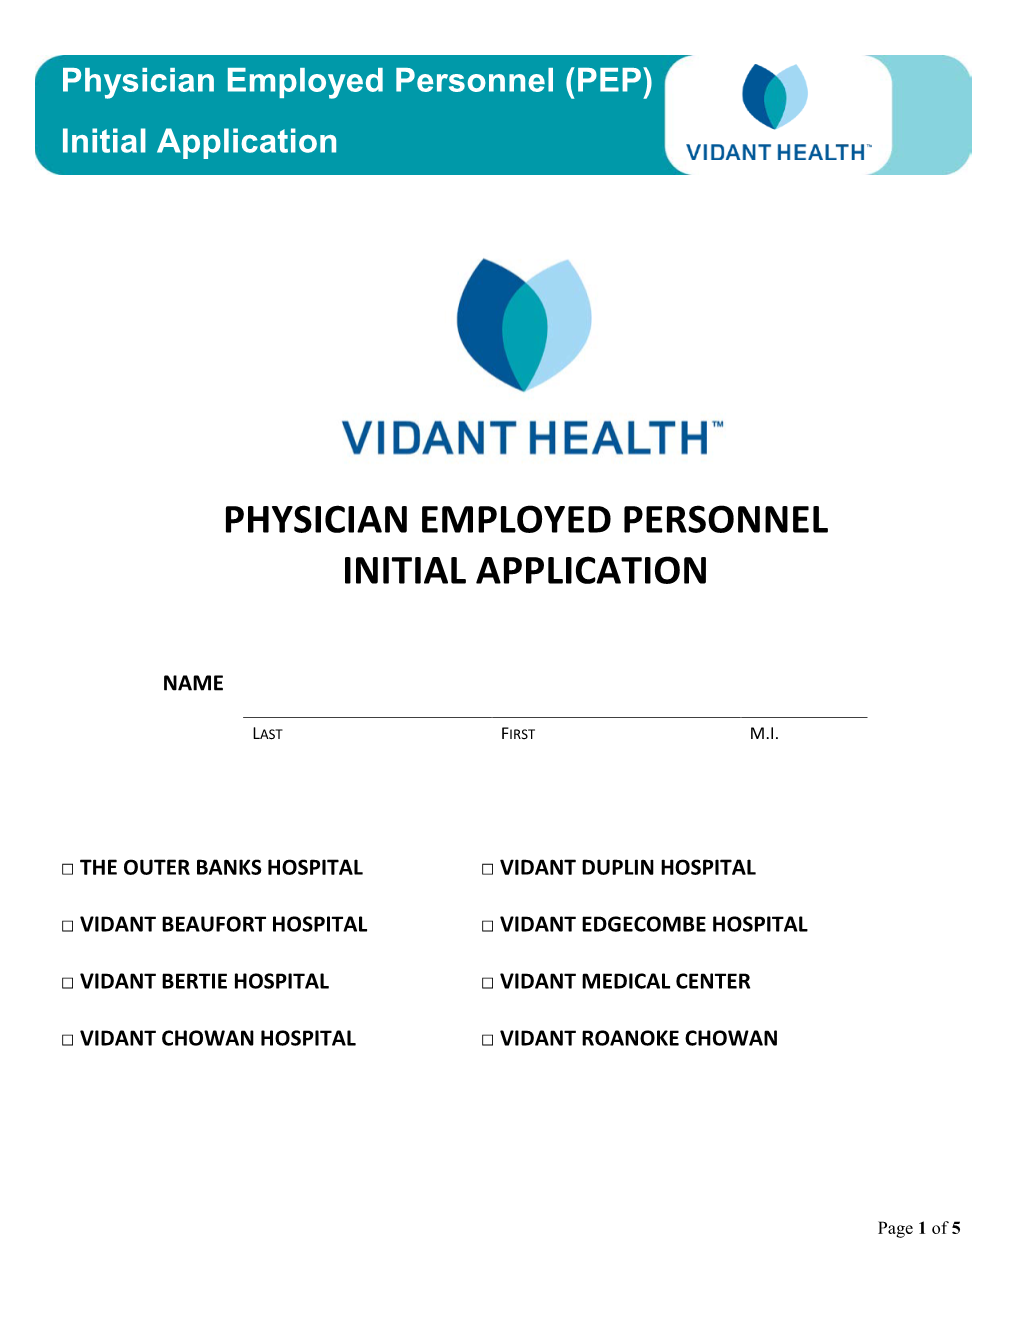 Physician Employed Personnel (PEP) Initial Application